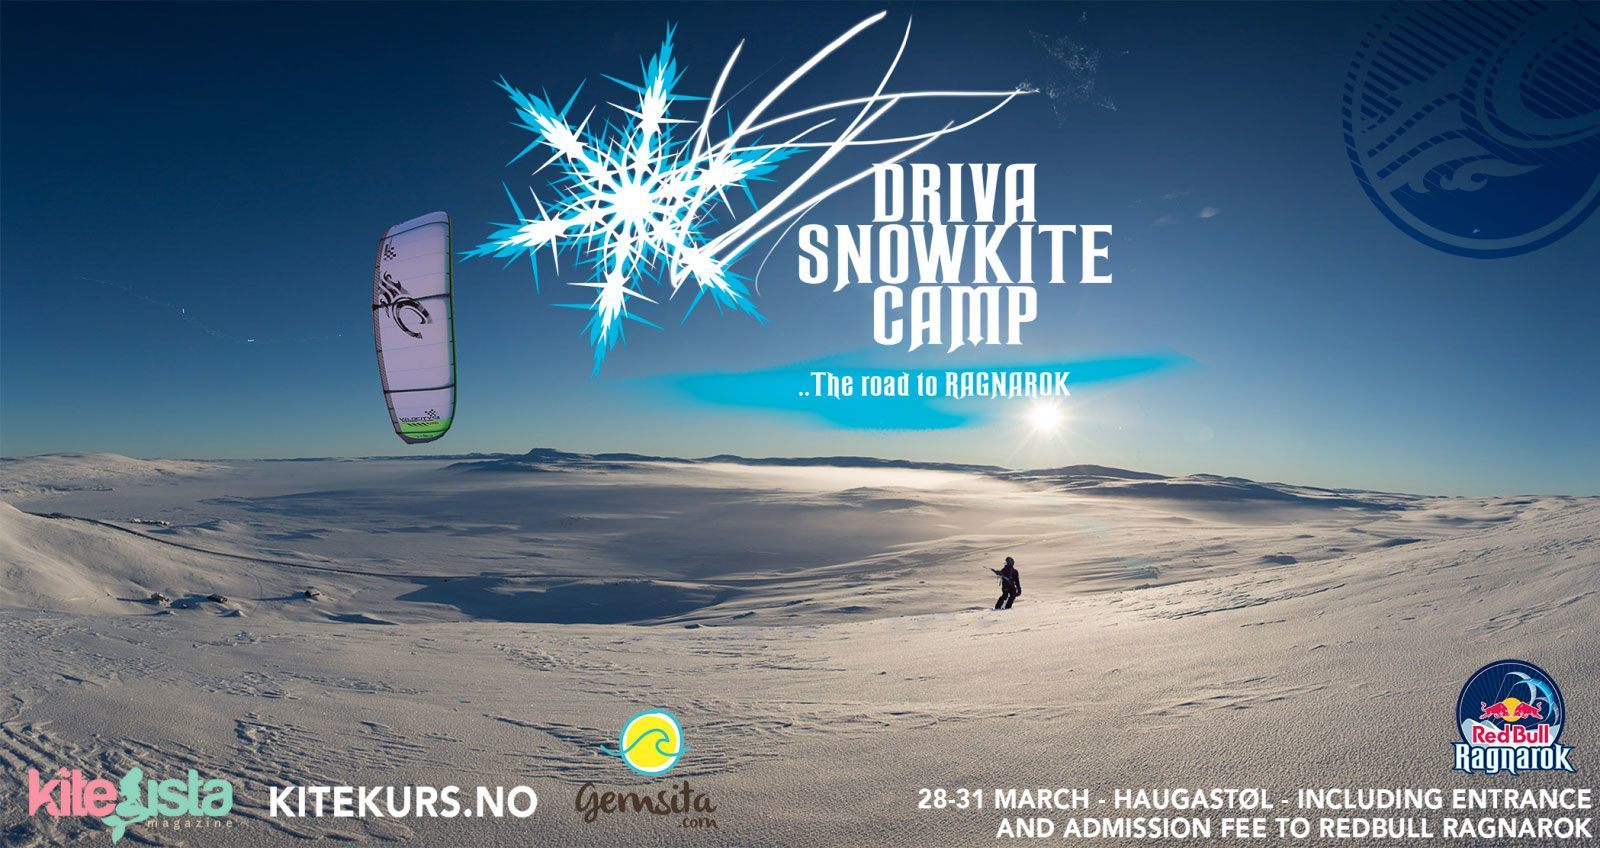 Red Bull Ragnarok is Coming – You Can Be Part of It with The Driva Snowkite Camp